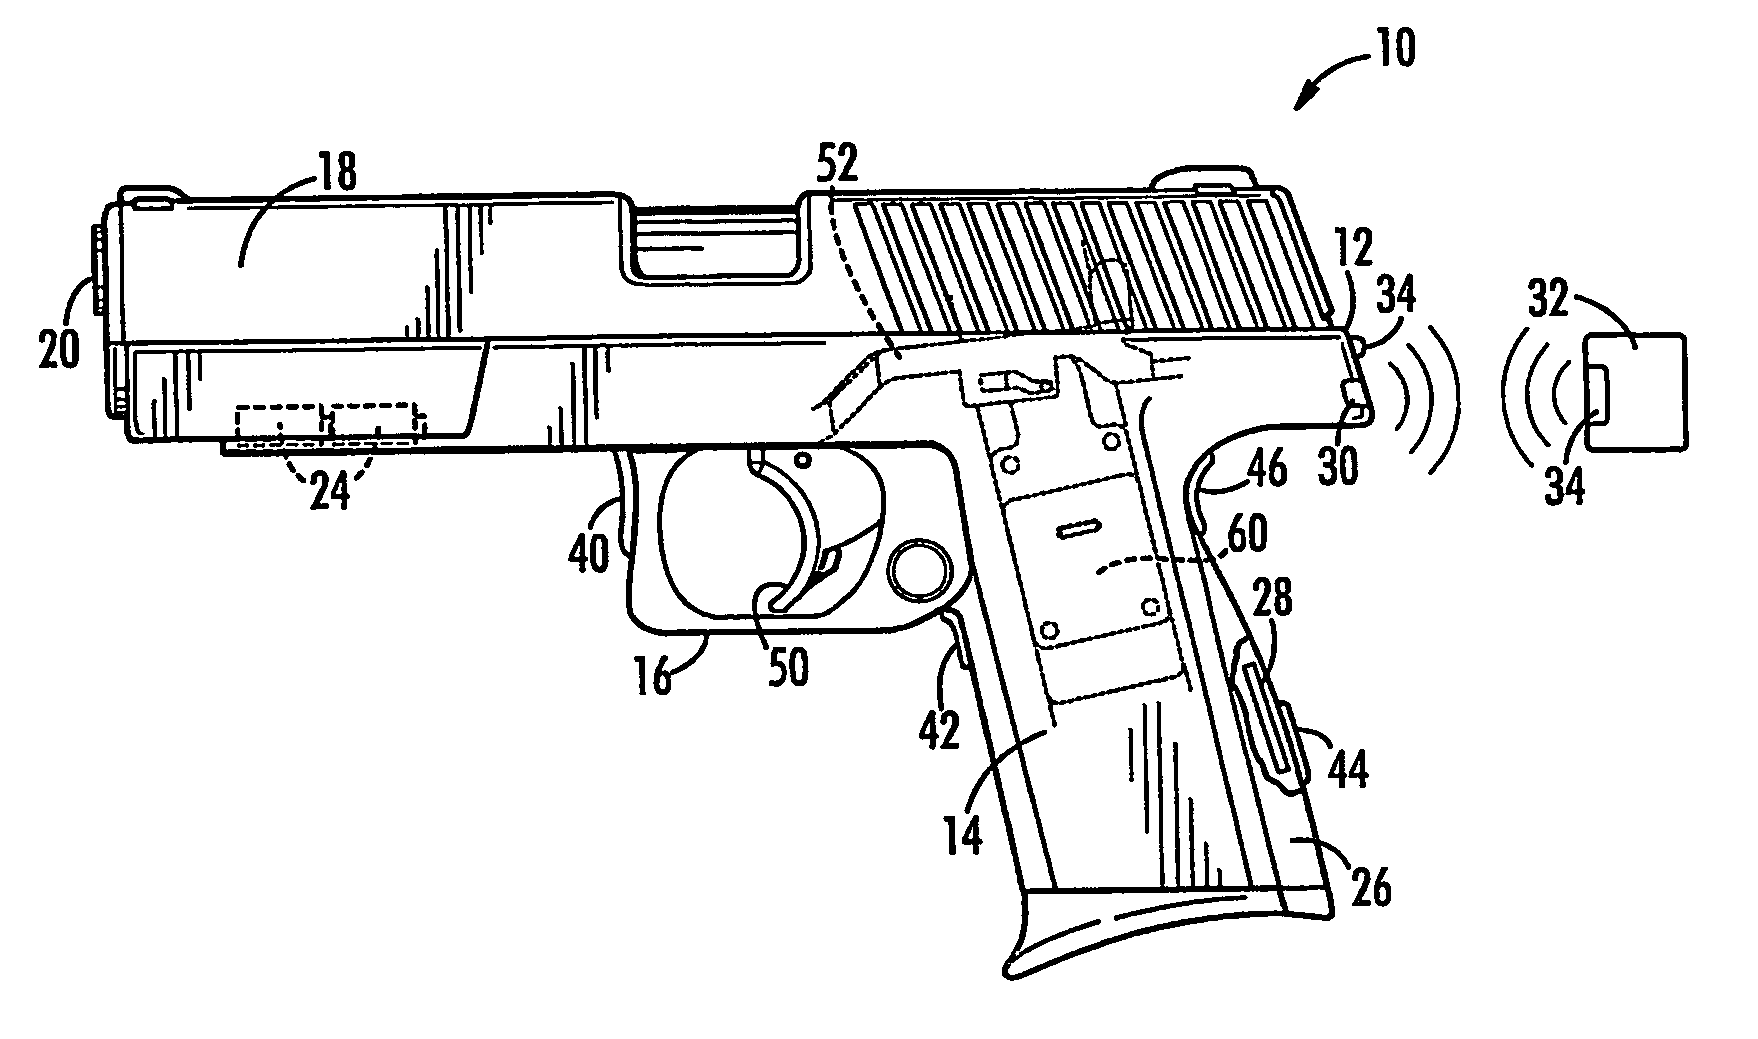 Firearm authorization system with piezo-electric disabler